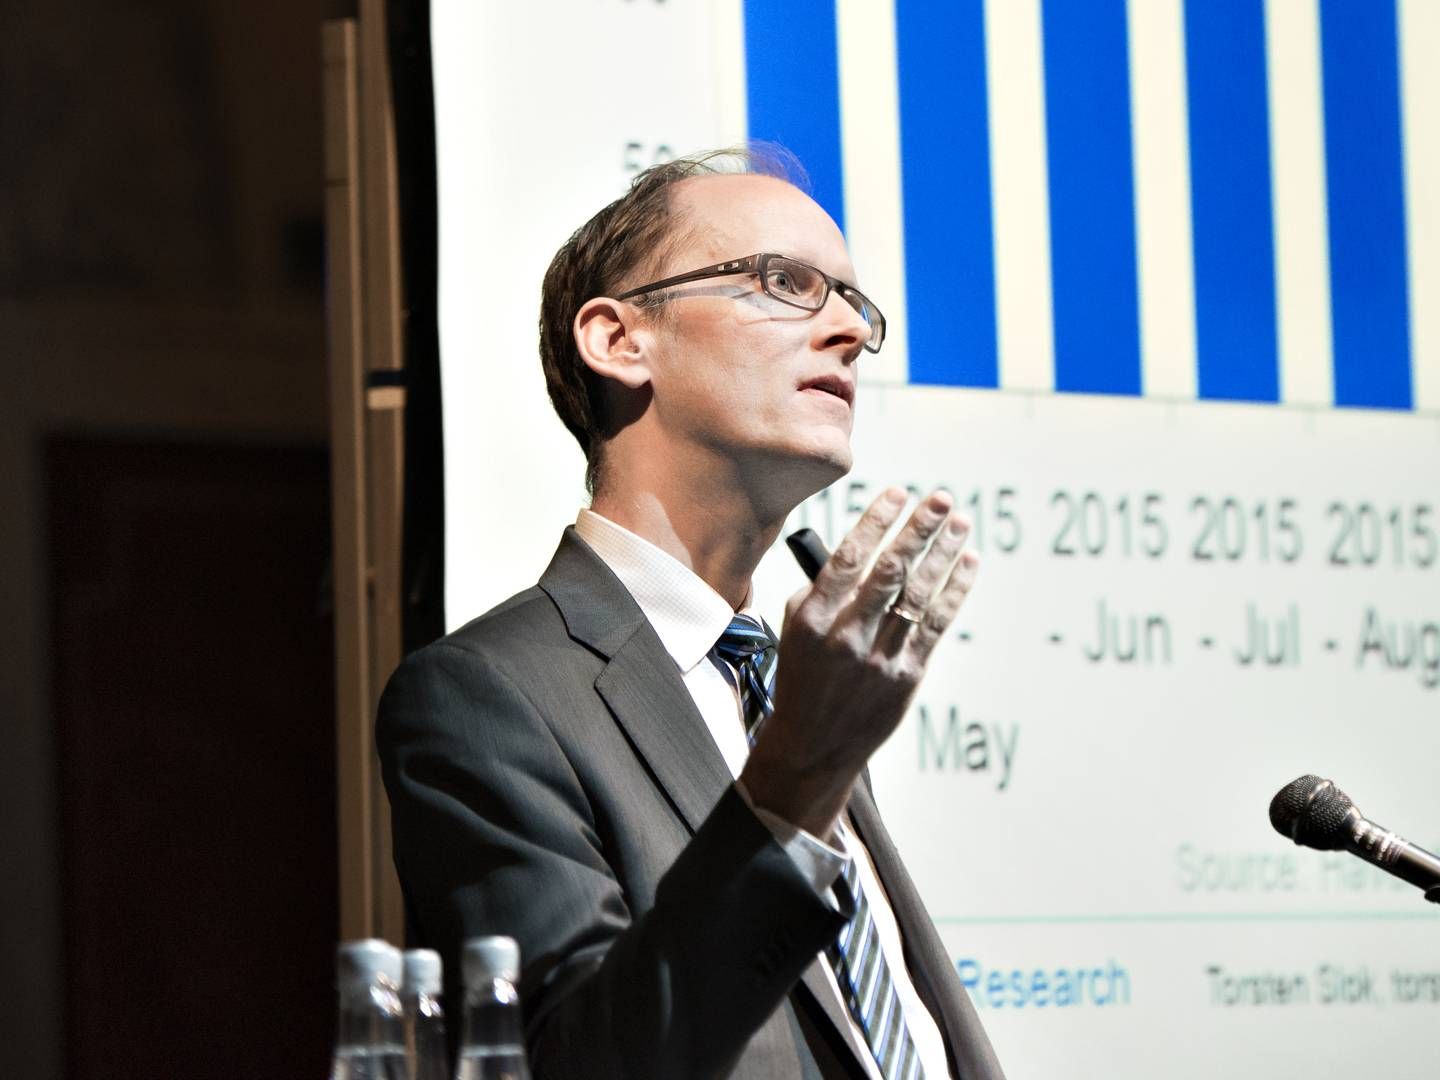 Torsten Slok speaking at a conference in Denmark in 2016 about the mortgage bonds. | Photo: Lars Krabbe